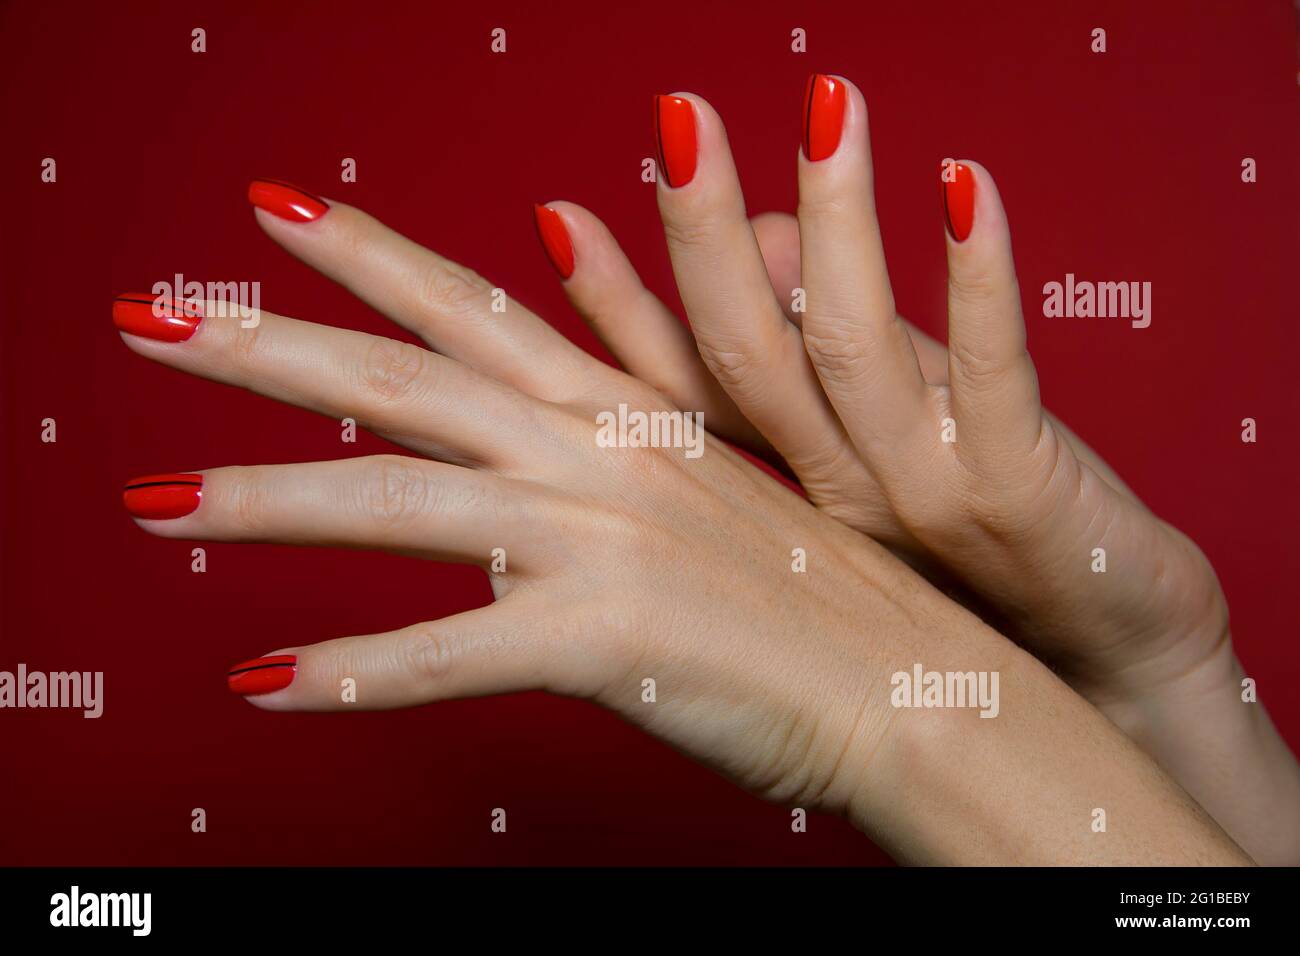 Nail design . Manicure nail paint . beautiful female hand with colorful nail art design manicure Stock Photo